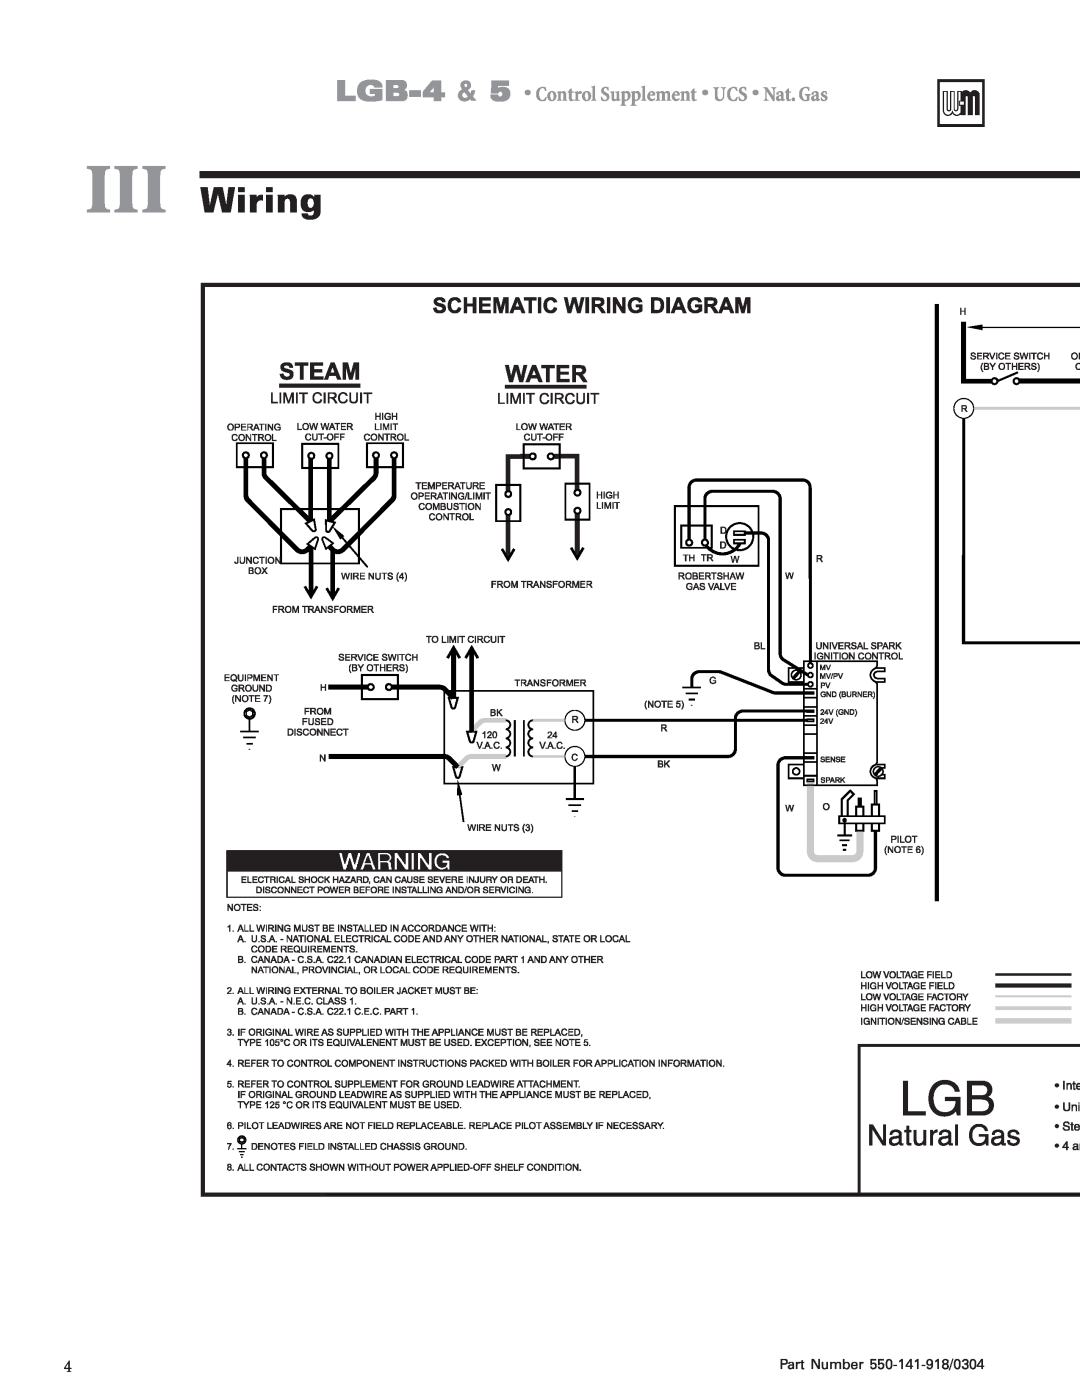 Weil-McLain LGB-5 operating instructions Wiring, LGB-4& 5 Control Supplement UCS Nat. Gas, Part Number 550-141-918/0304 